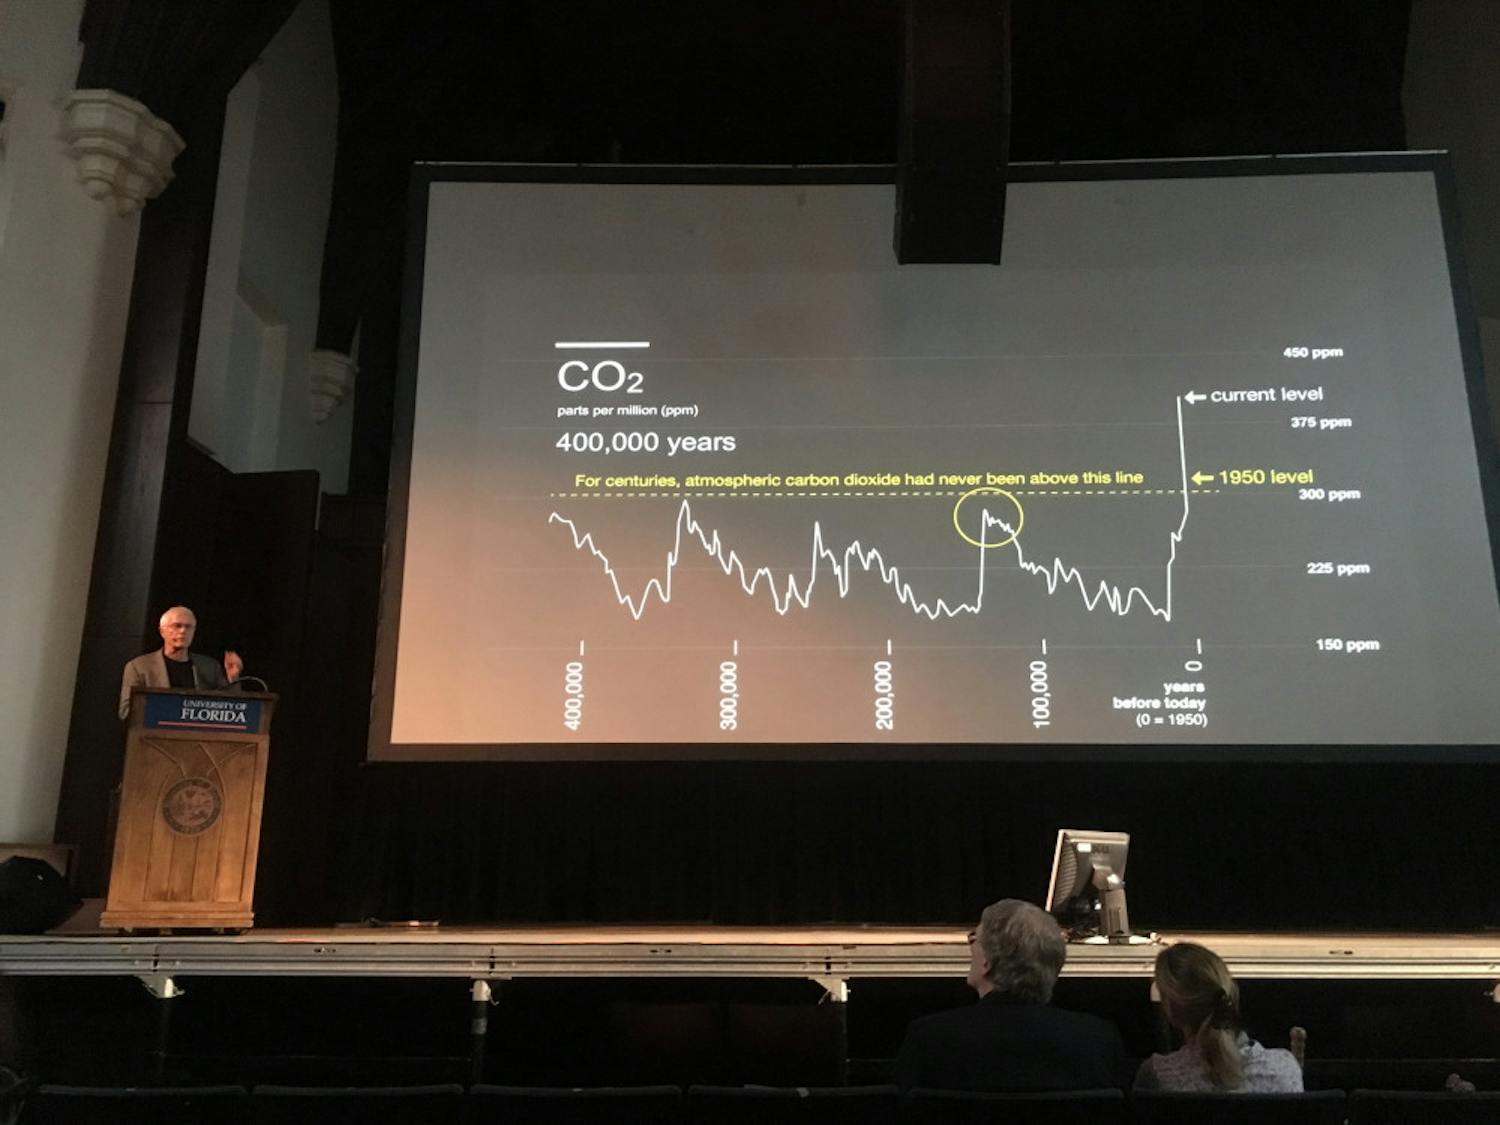 Paul Hawken, an author, environmentalist, activist and entrepreneur, spoke at the University Auditorium as the Campus Earth Week Keynote speaker. He talked about his work as the executive director of Project Drawdown, a nonprofit working to reverse global warming.